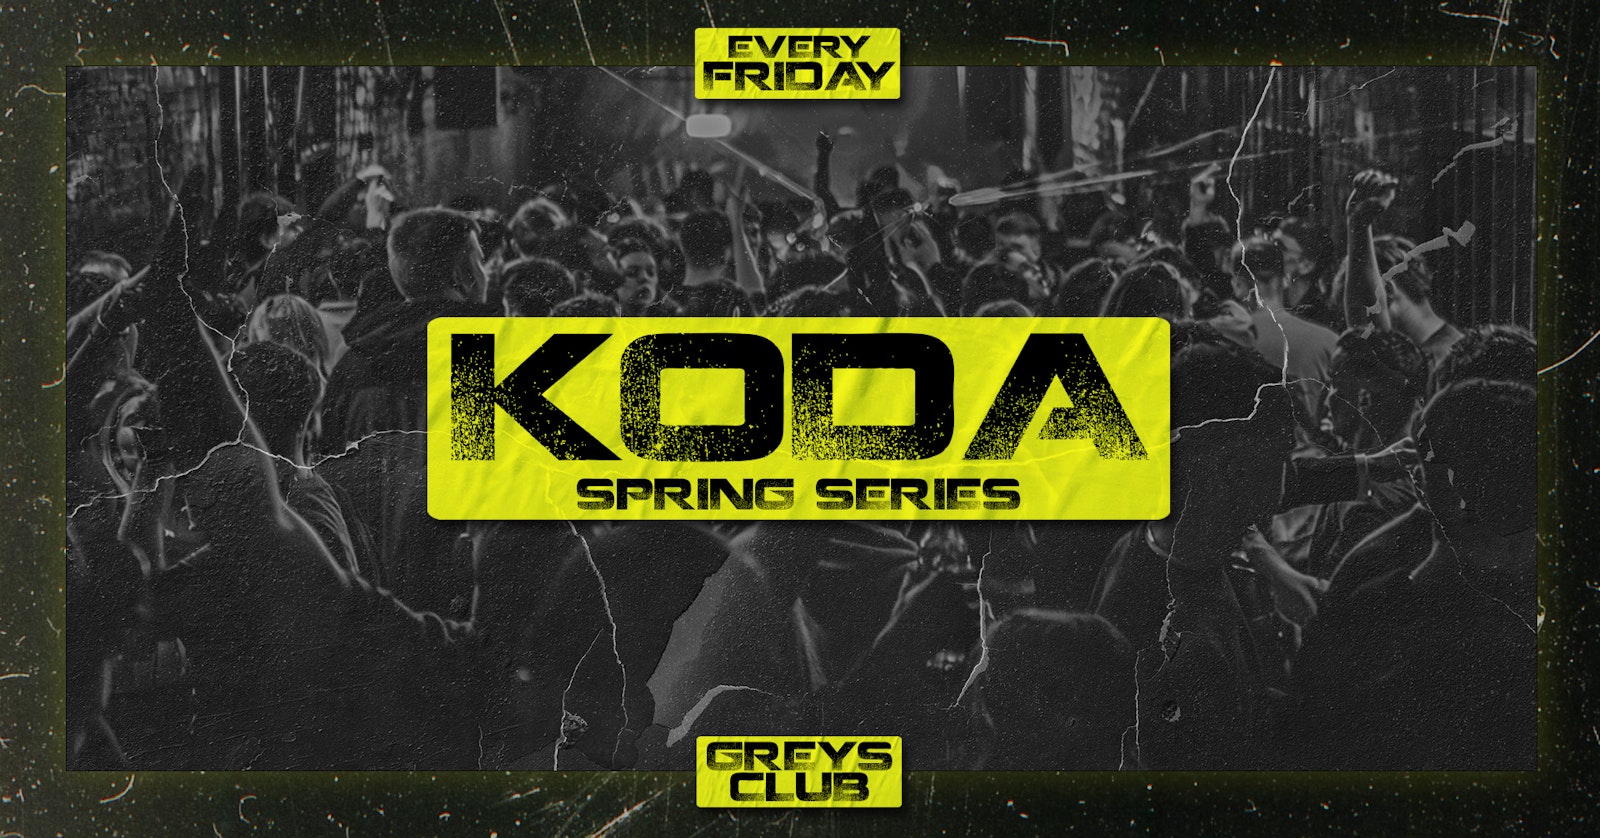 KODA FRIDAYS – SPRING SERIES ⛱️ 84% TICKETS SOLD! // NEW TERRACE LAUNCH 🔆